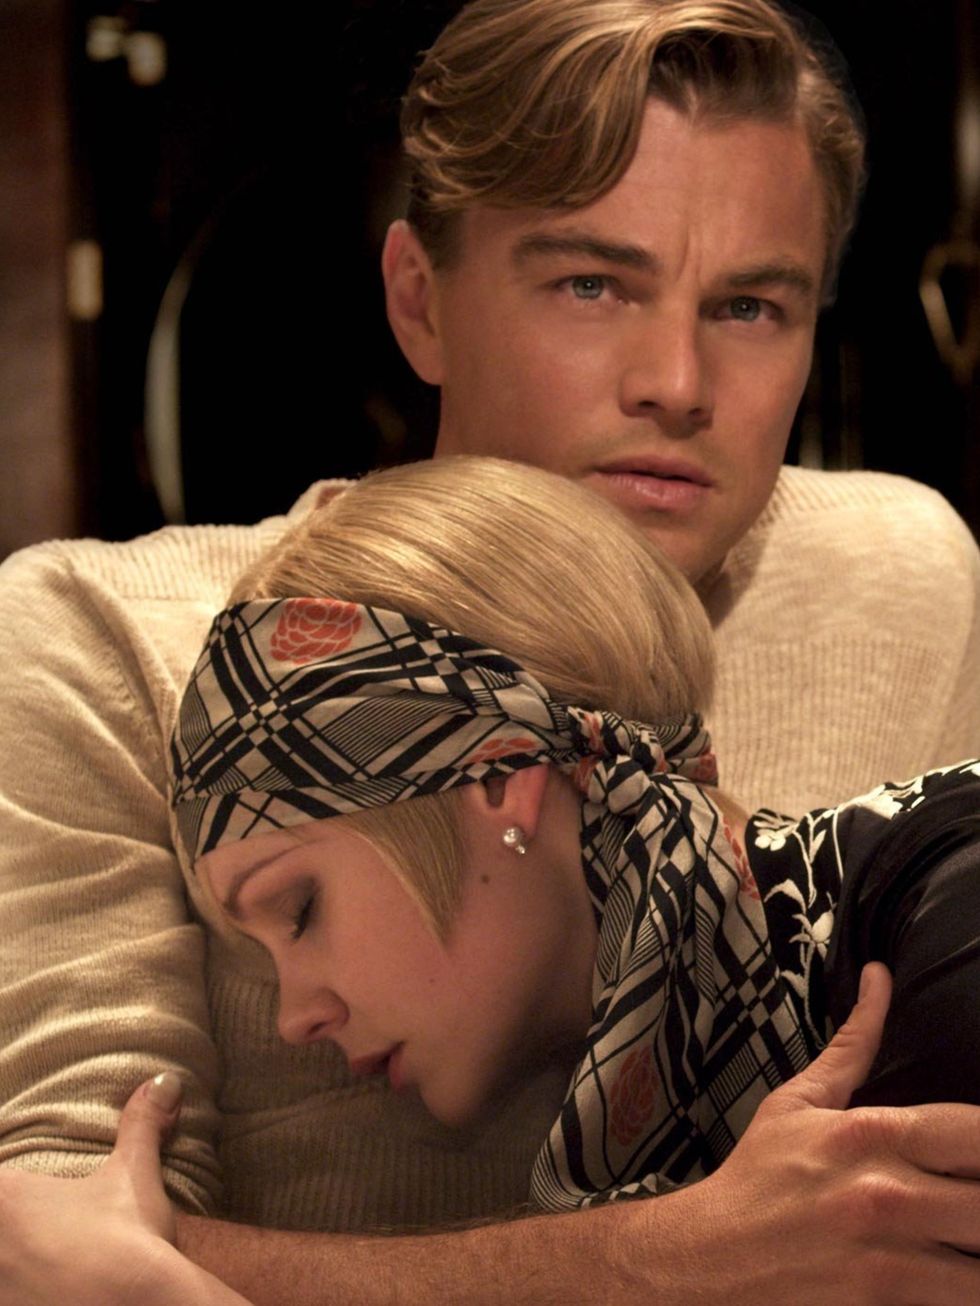 <p>Get away from her Gatsby, shes trouble!</p>